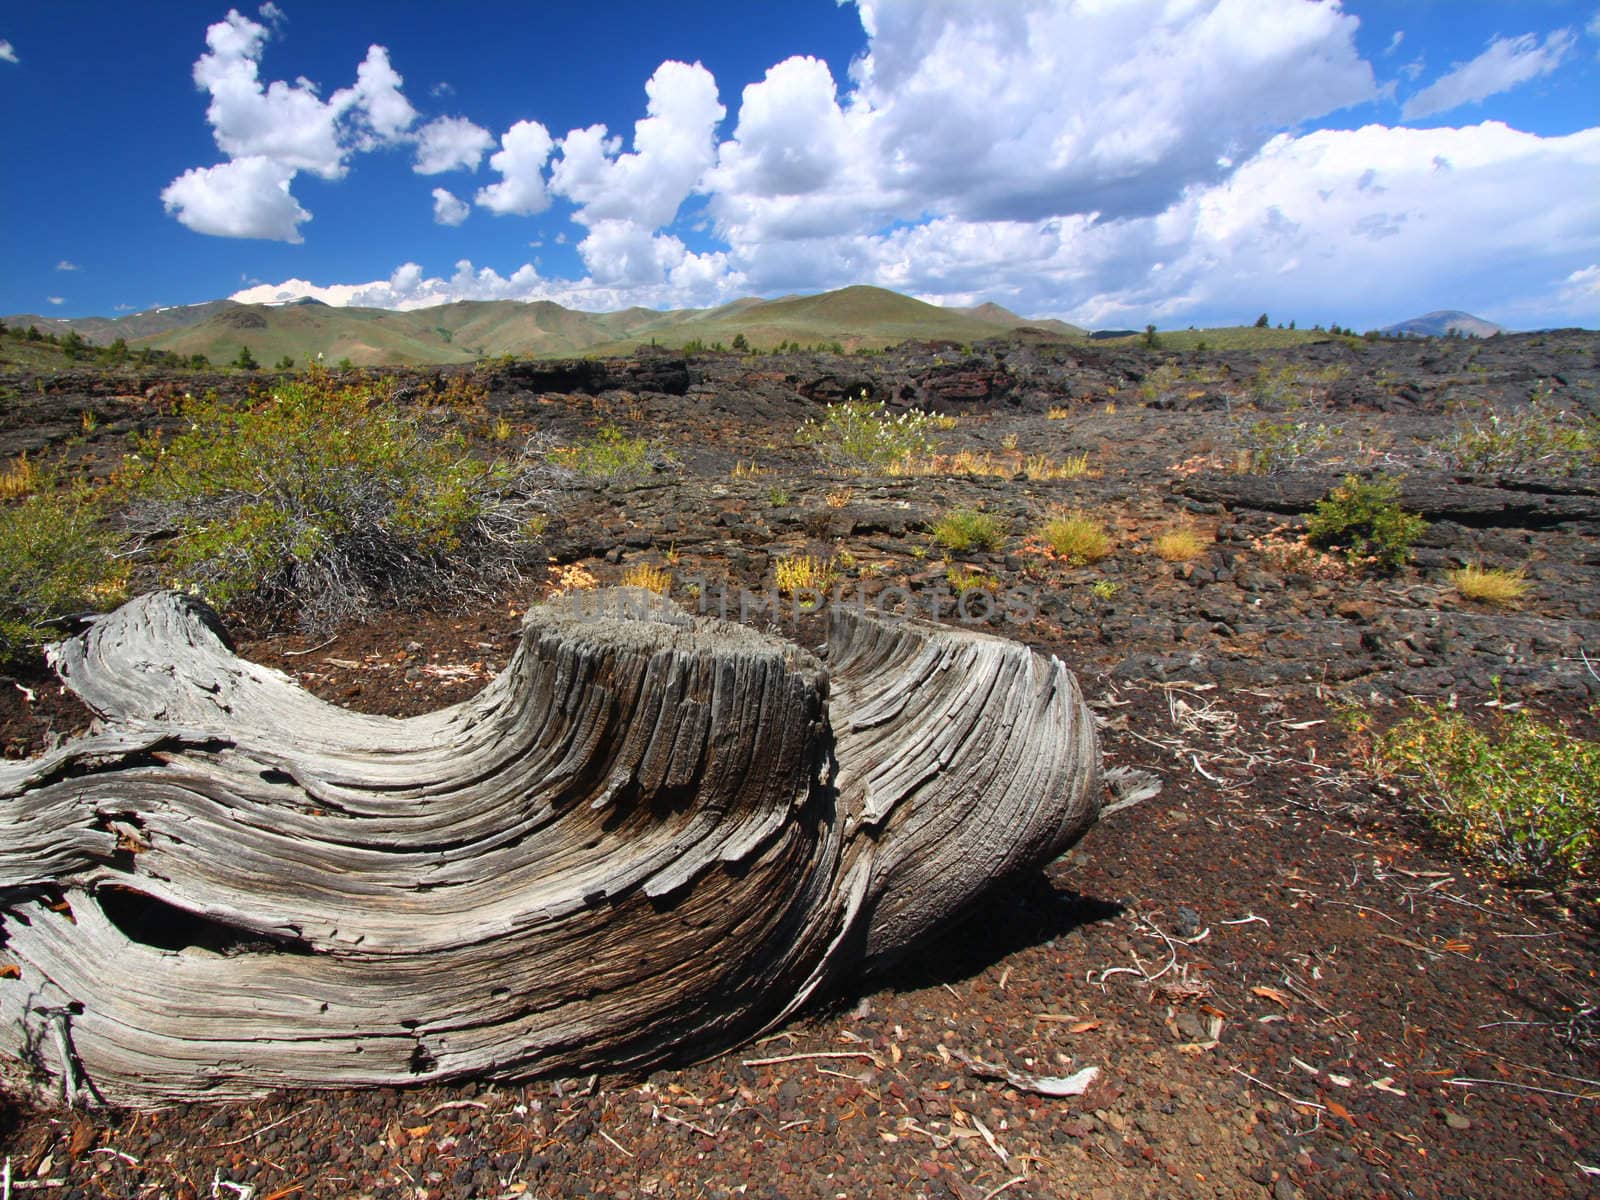 Strange volcanic landscape at Craters of the Moon National Monument of Idaho.